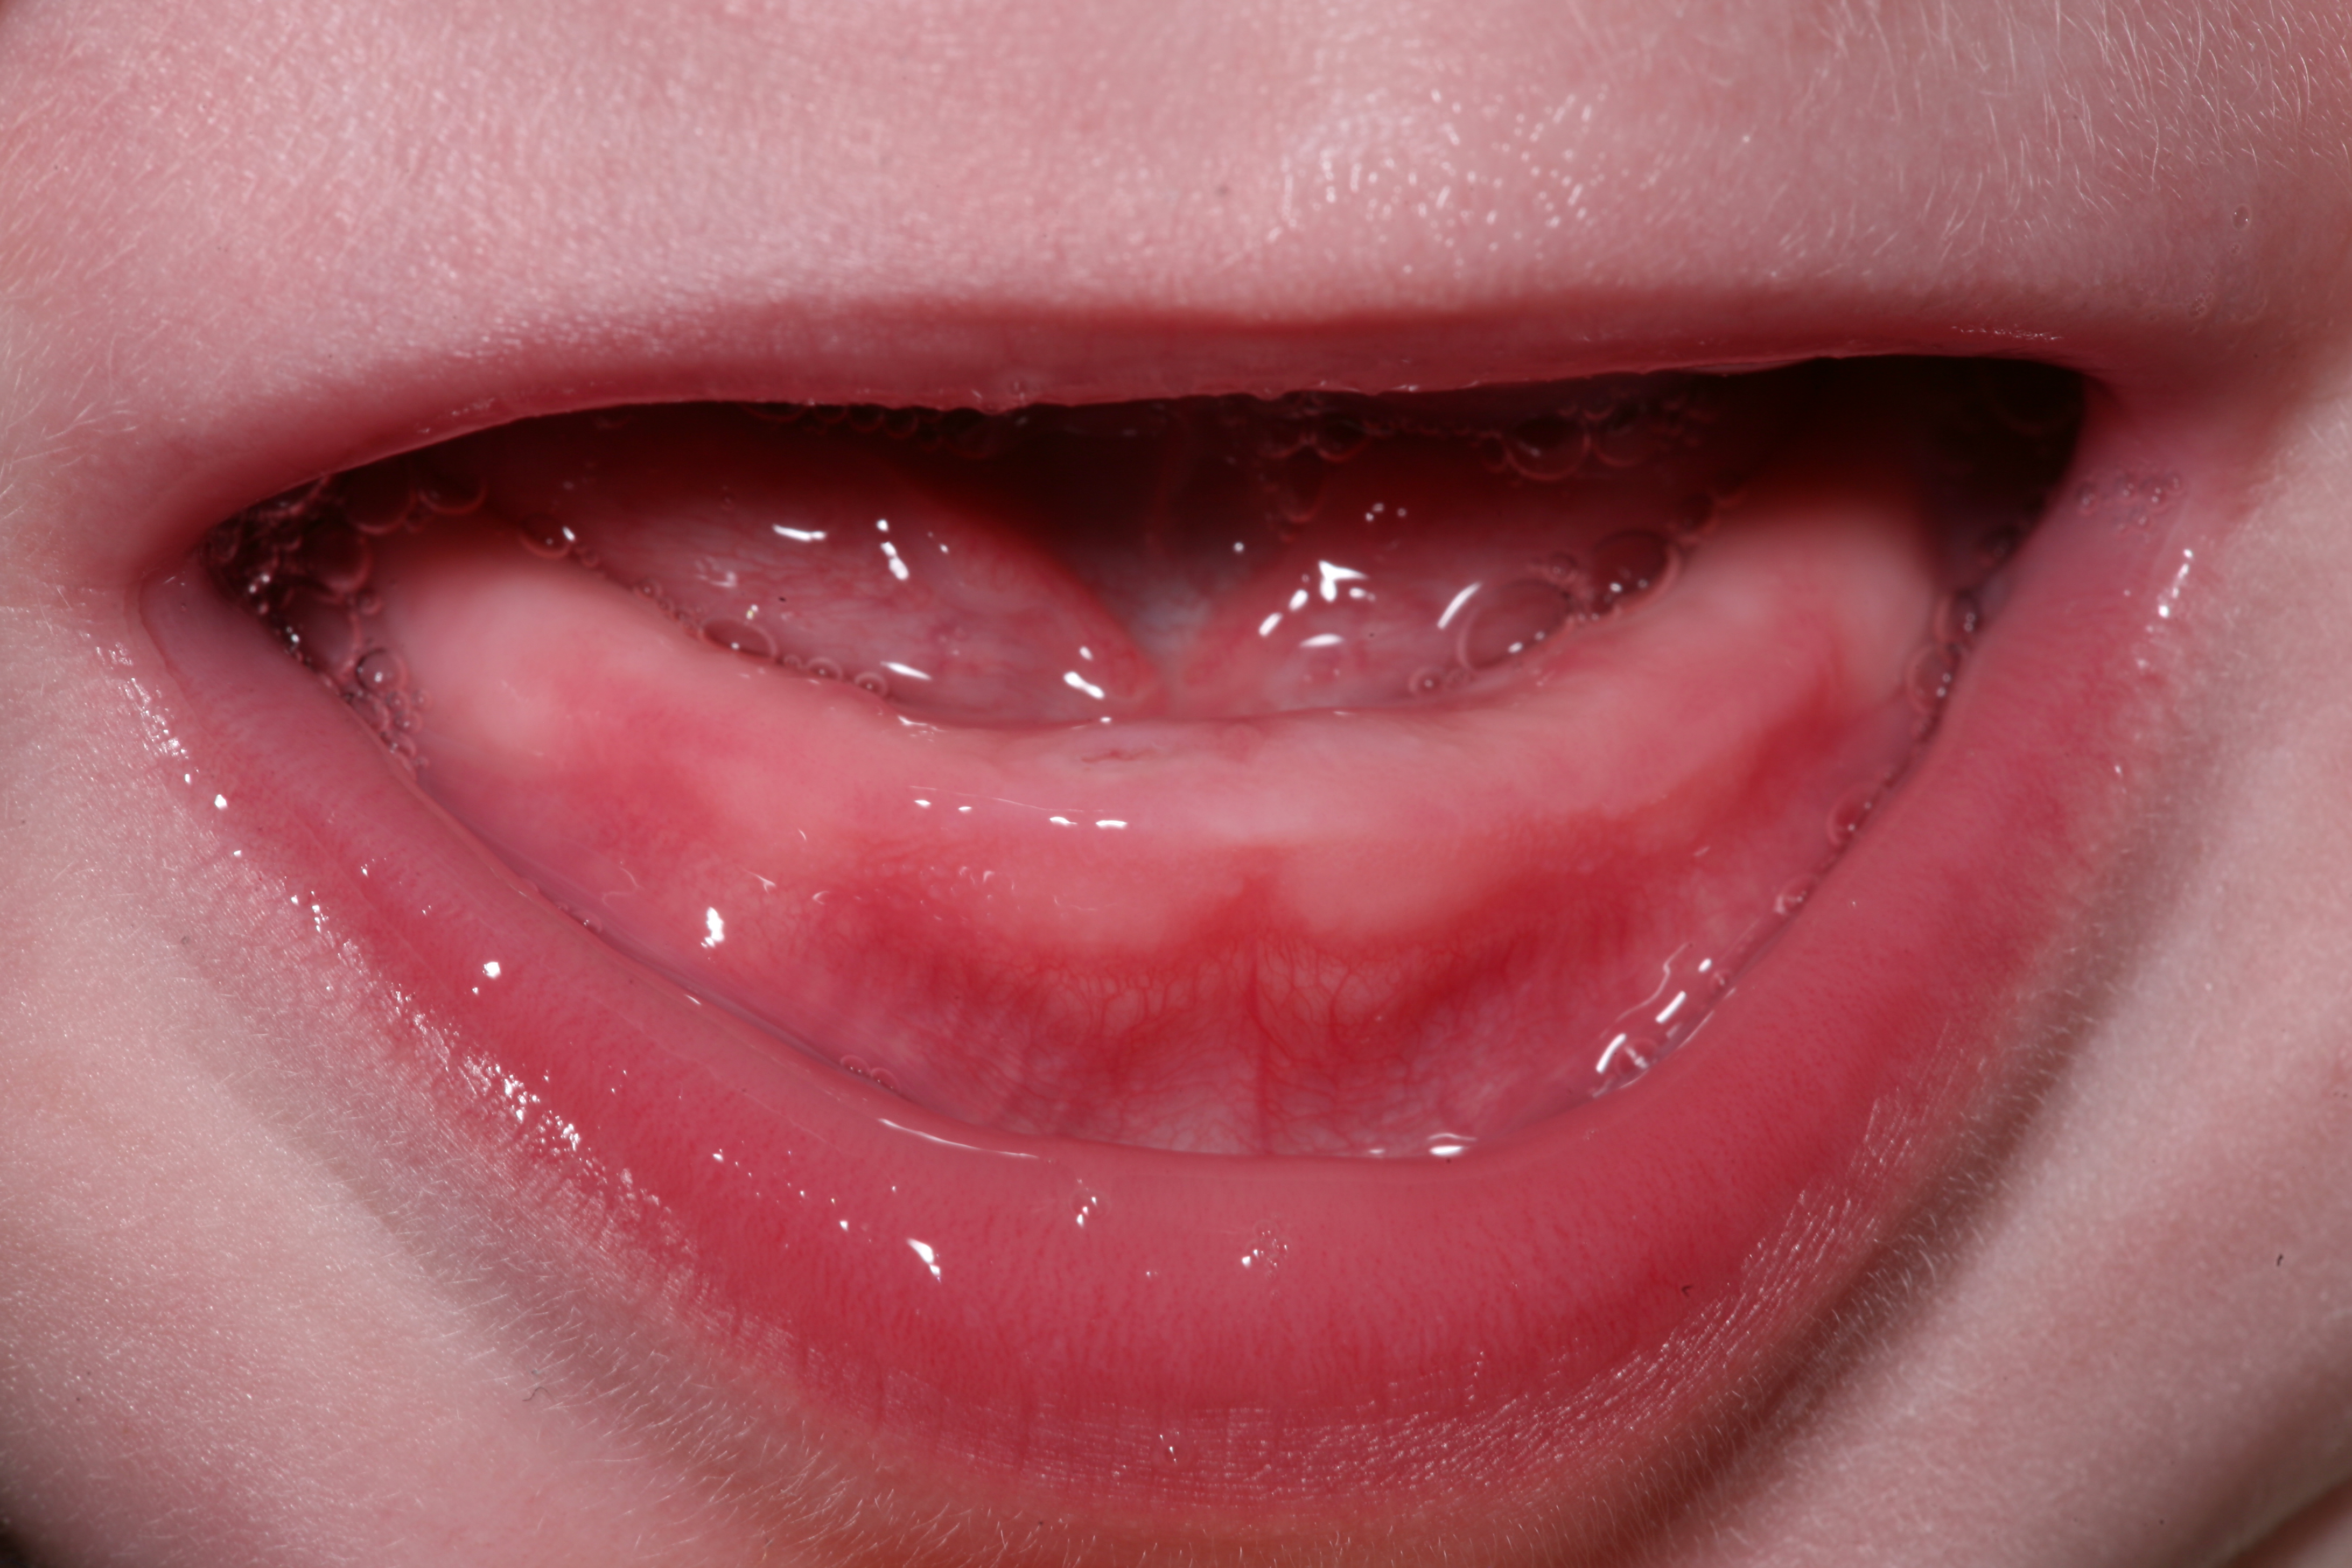 Teething baby: first sign of the lower right incisor breaking through the oral mucosa.